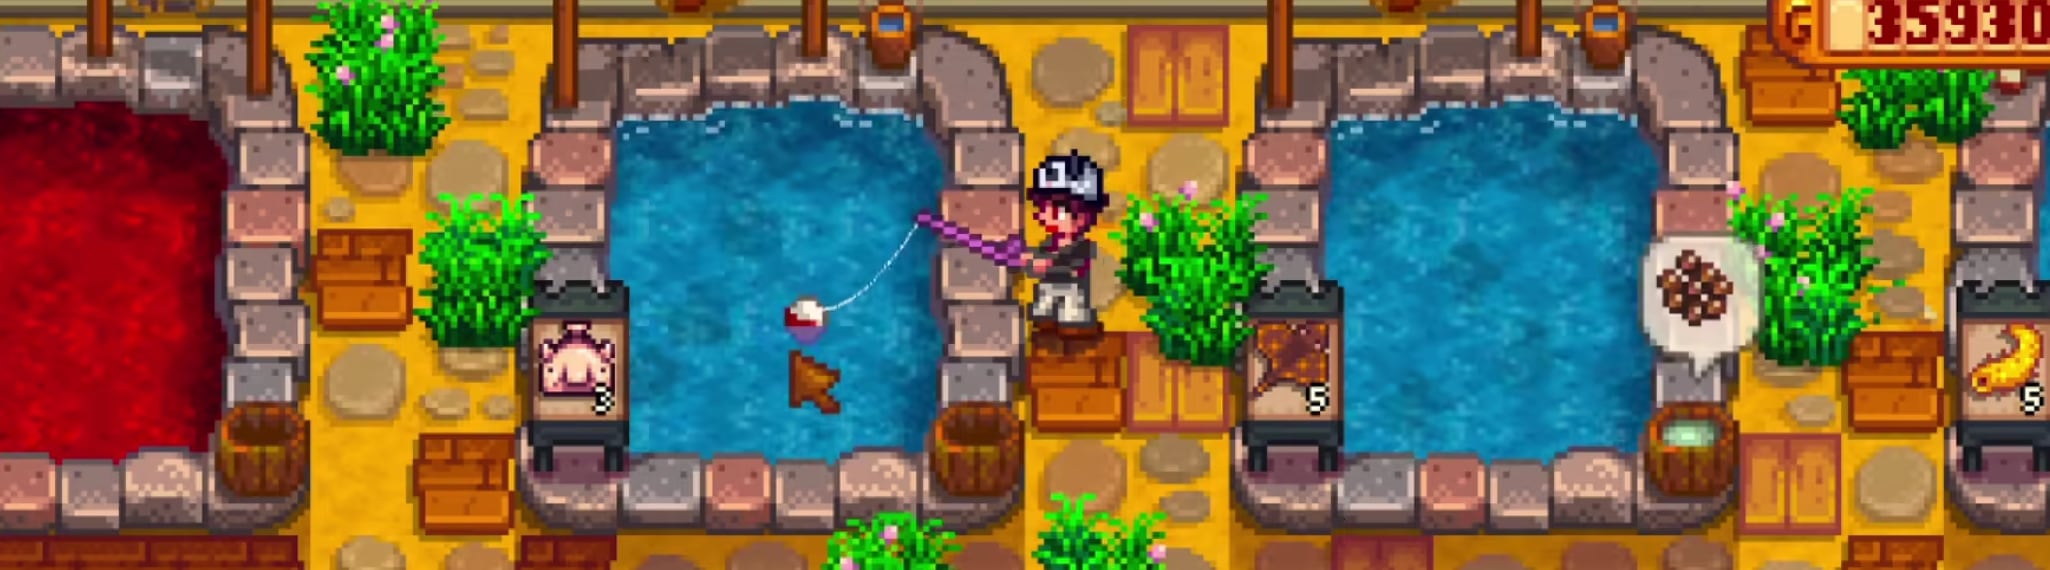 Fishing in the Fish Pond